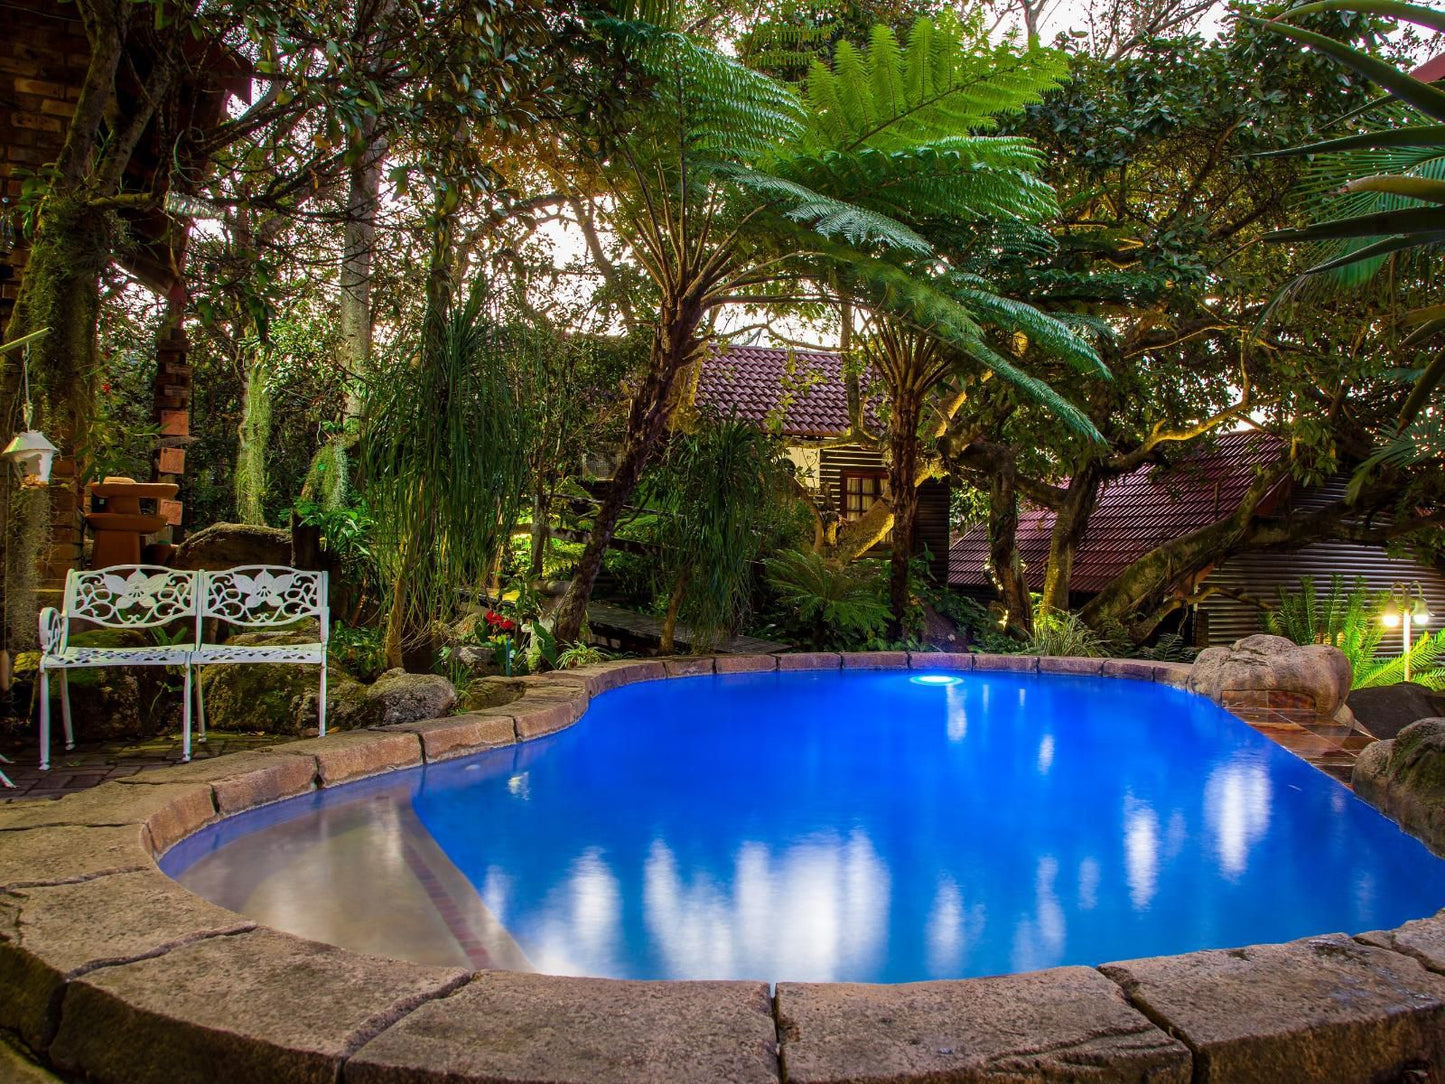 Beetleloop Guesthouse Nelspruit Mpumalanga South Africa Complementary Colors, Garden, Nature, Plant, Swimming Pool